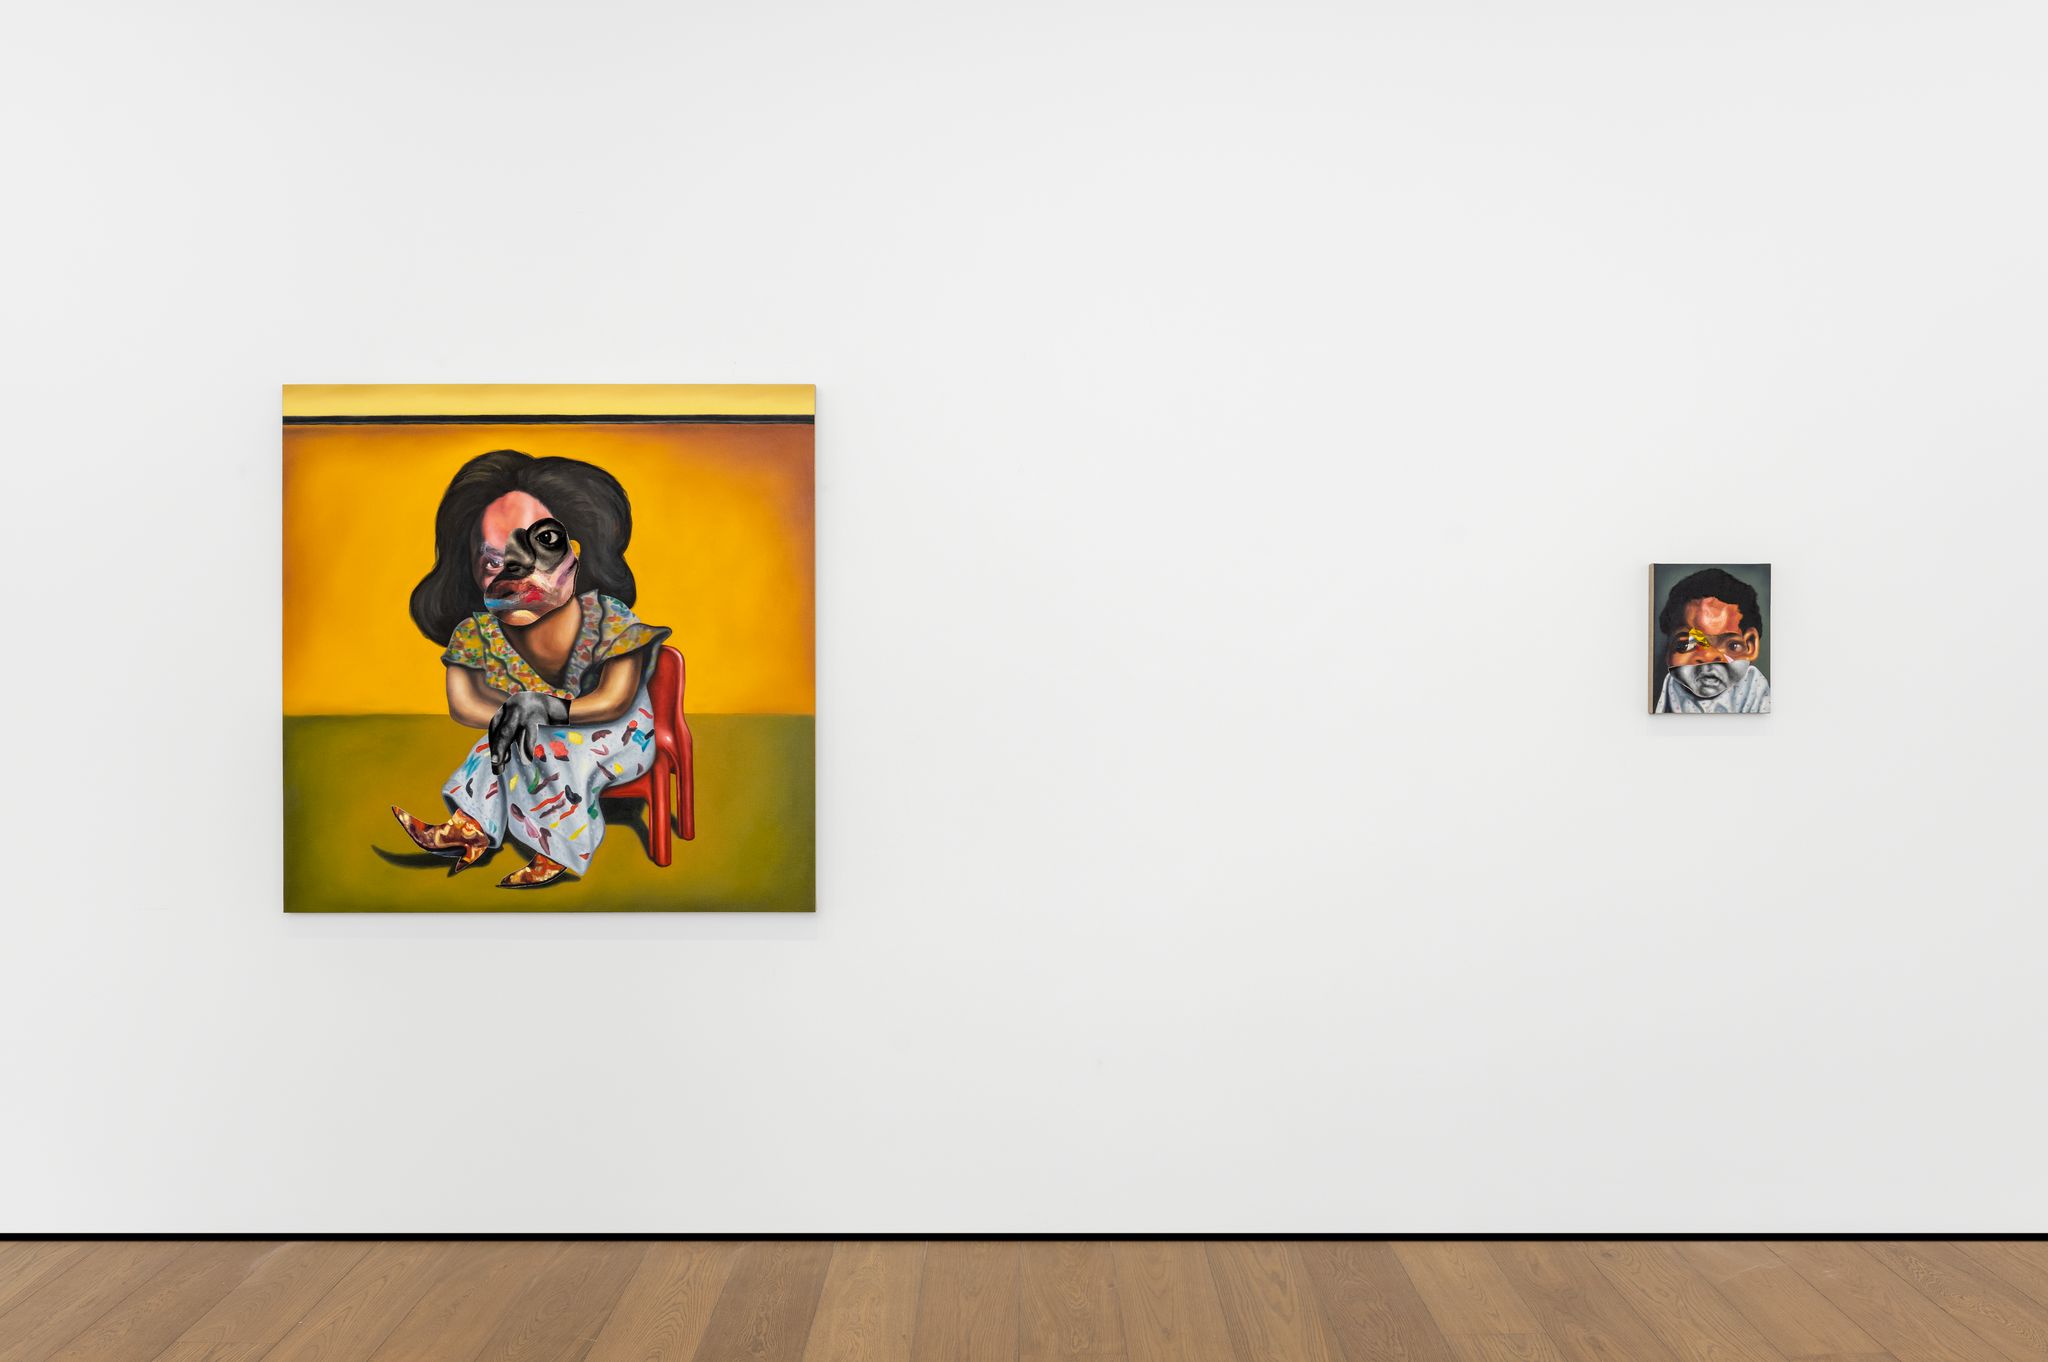 A couple of paintings on a wall

Description automatically generated with low confidence